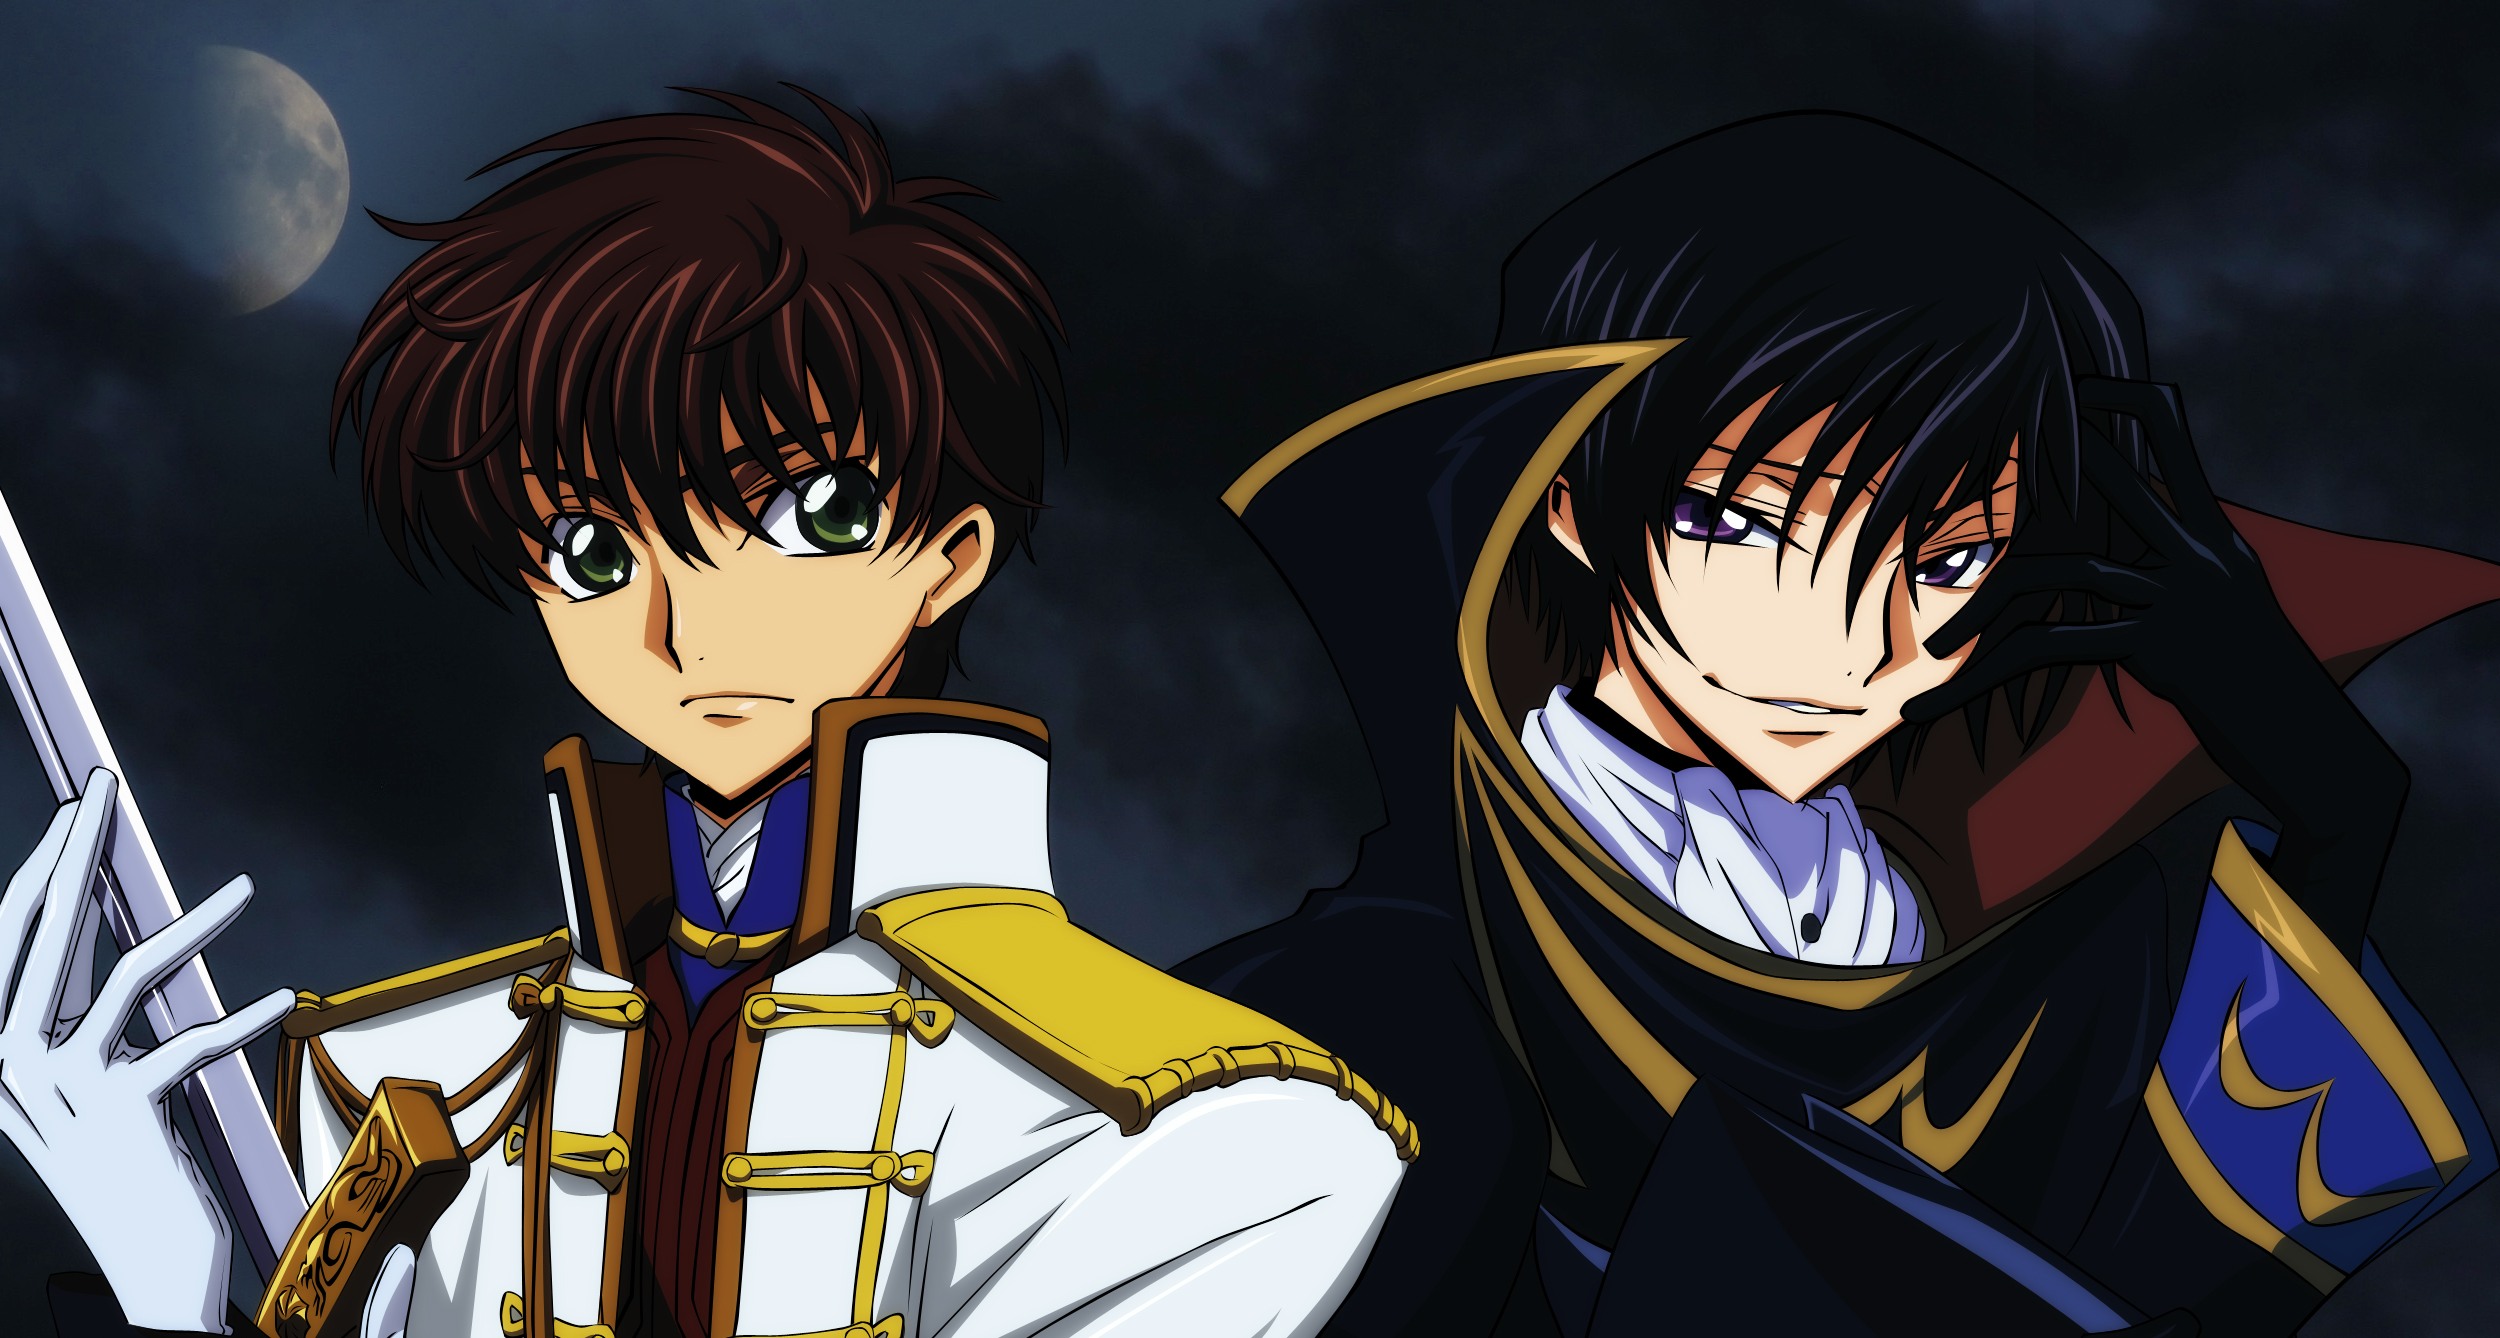 Was Lelouch Alive at the End of Code Geass? – In Asian Spaces